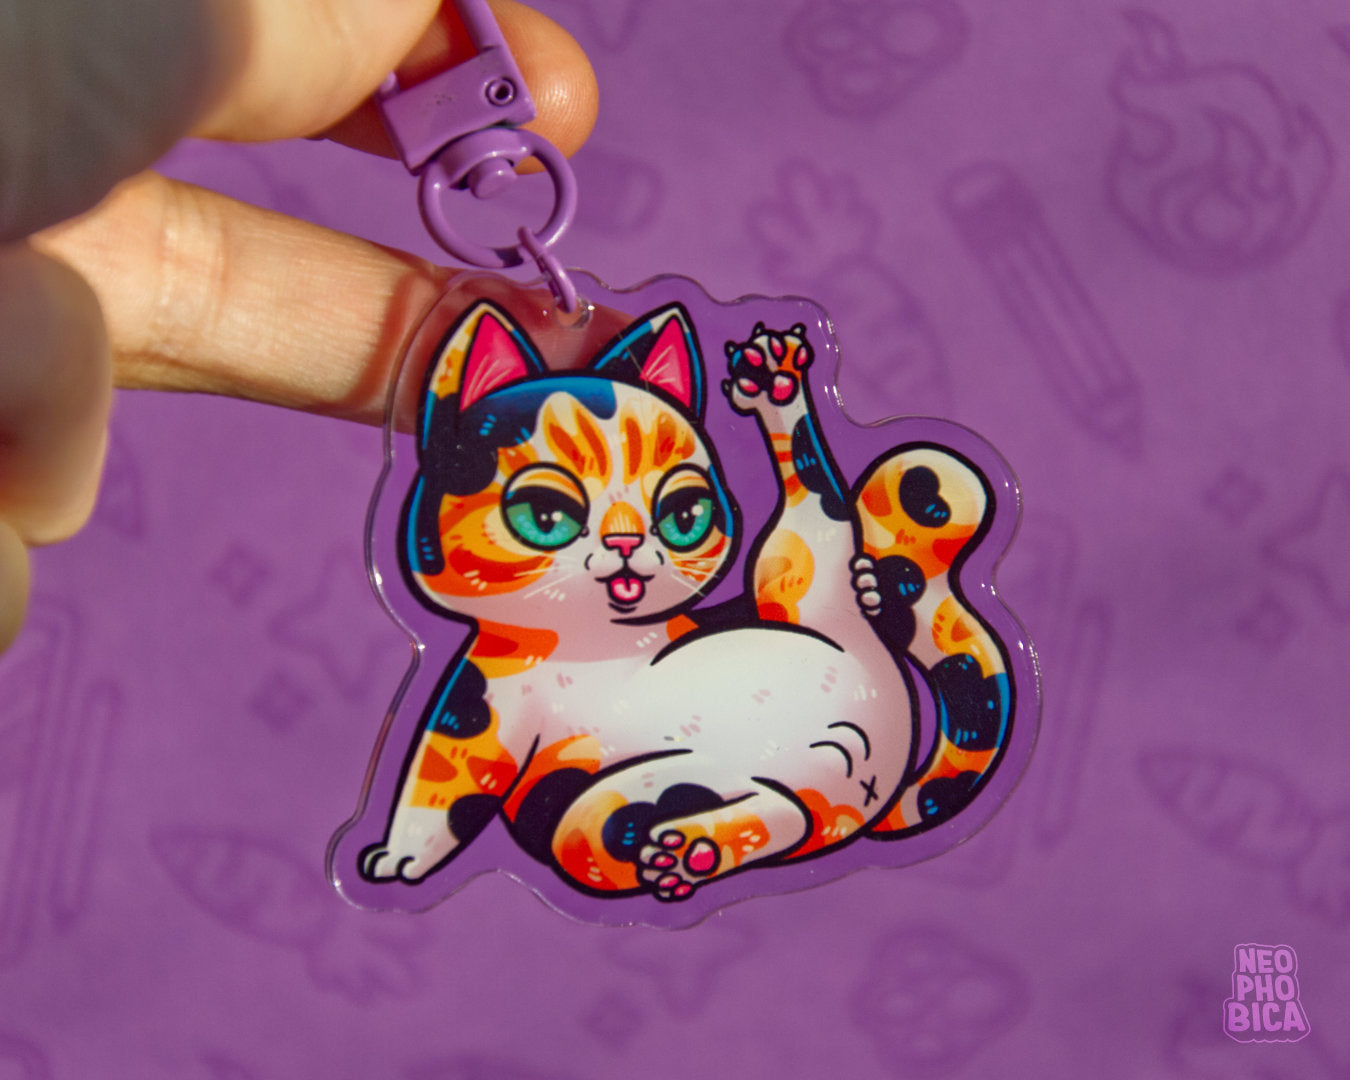 Calico Mind Your Business - Acrylic Charm